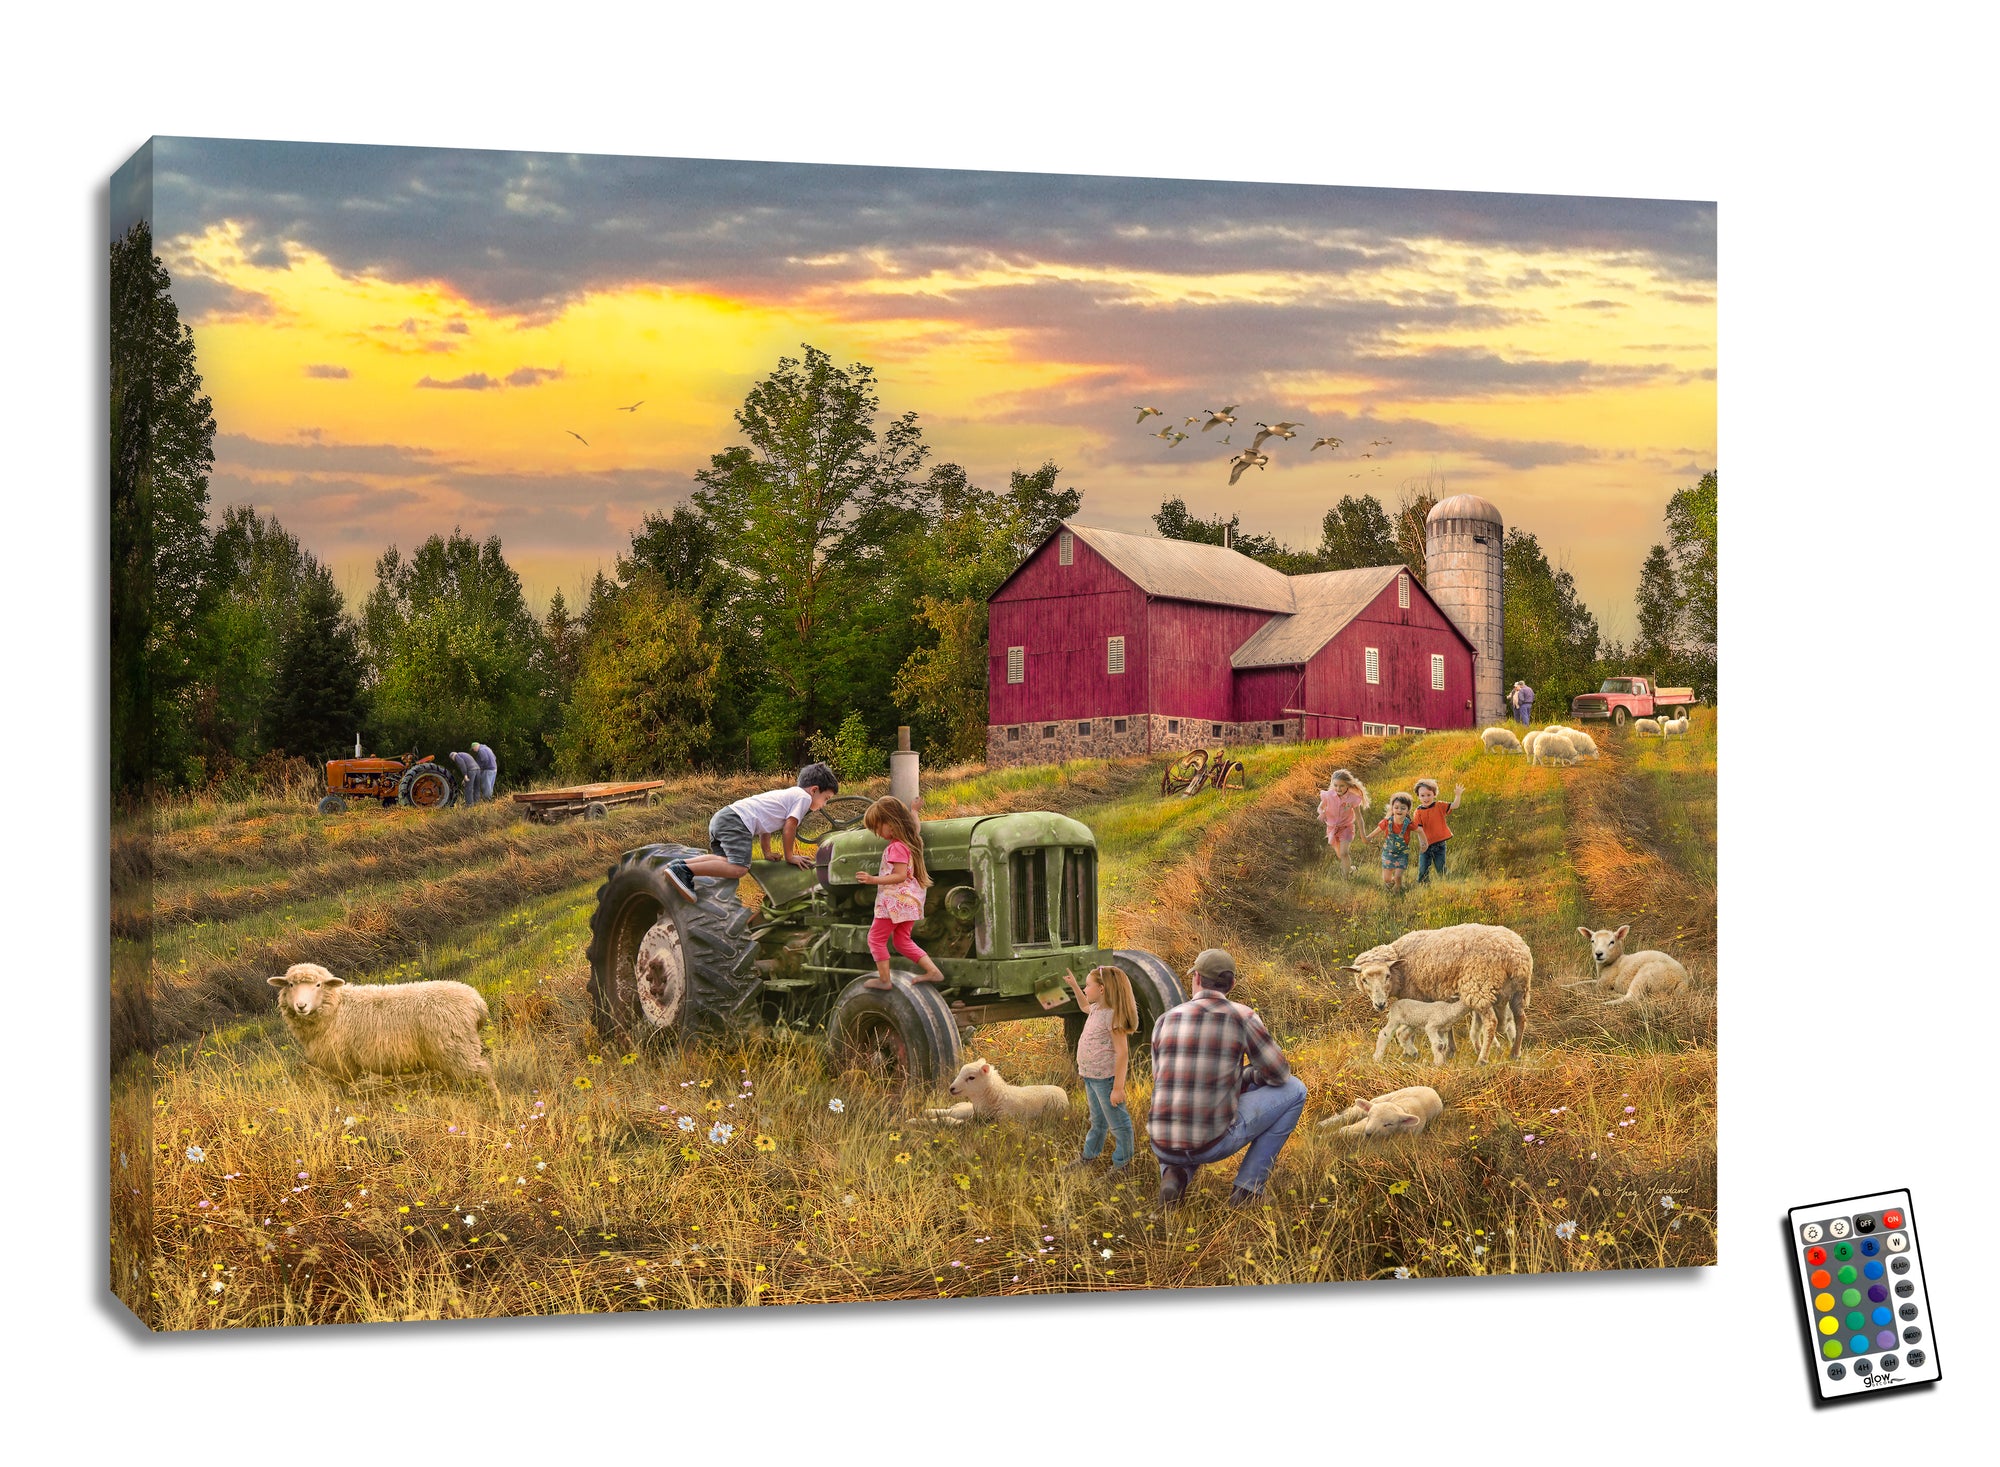 This enchanting artwork captures the essence of rural life as a farmer and his family play and laugh on and around their trusty tractor, surrounded by fluffy sheep and a charming red barn in the background.